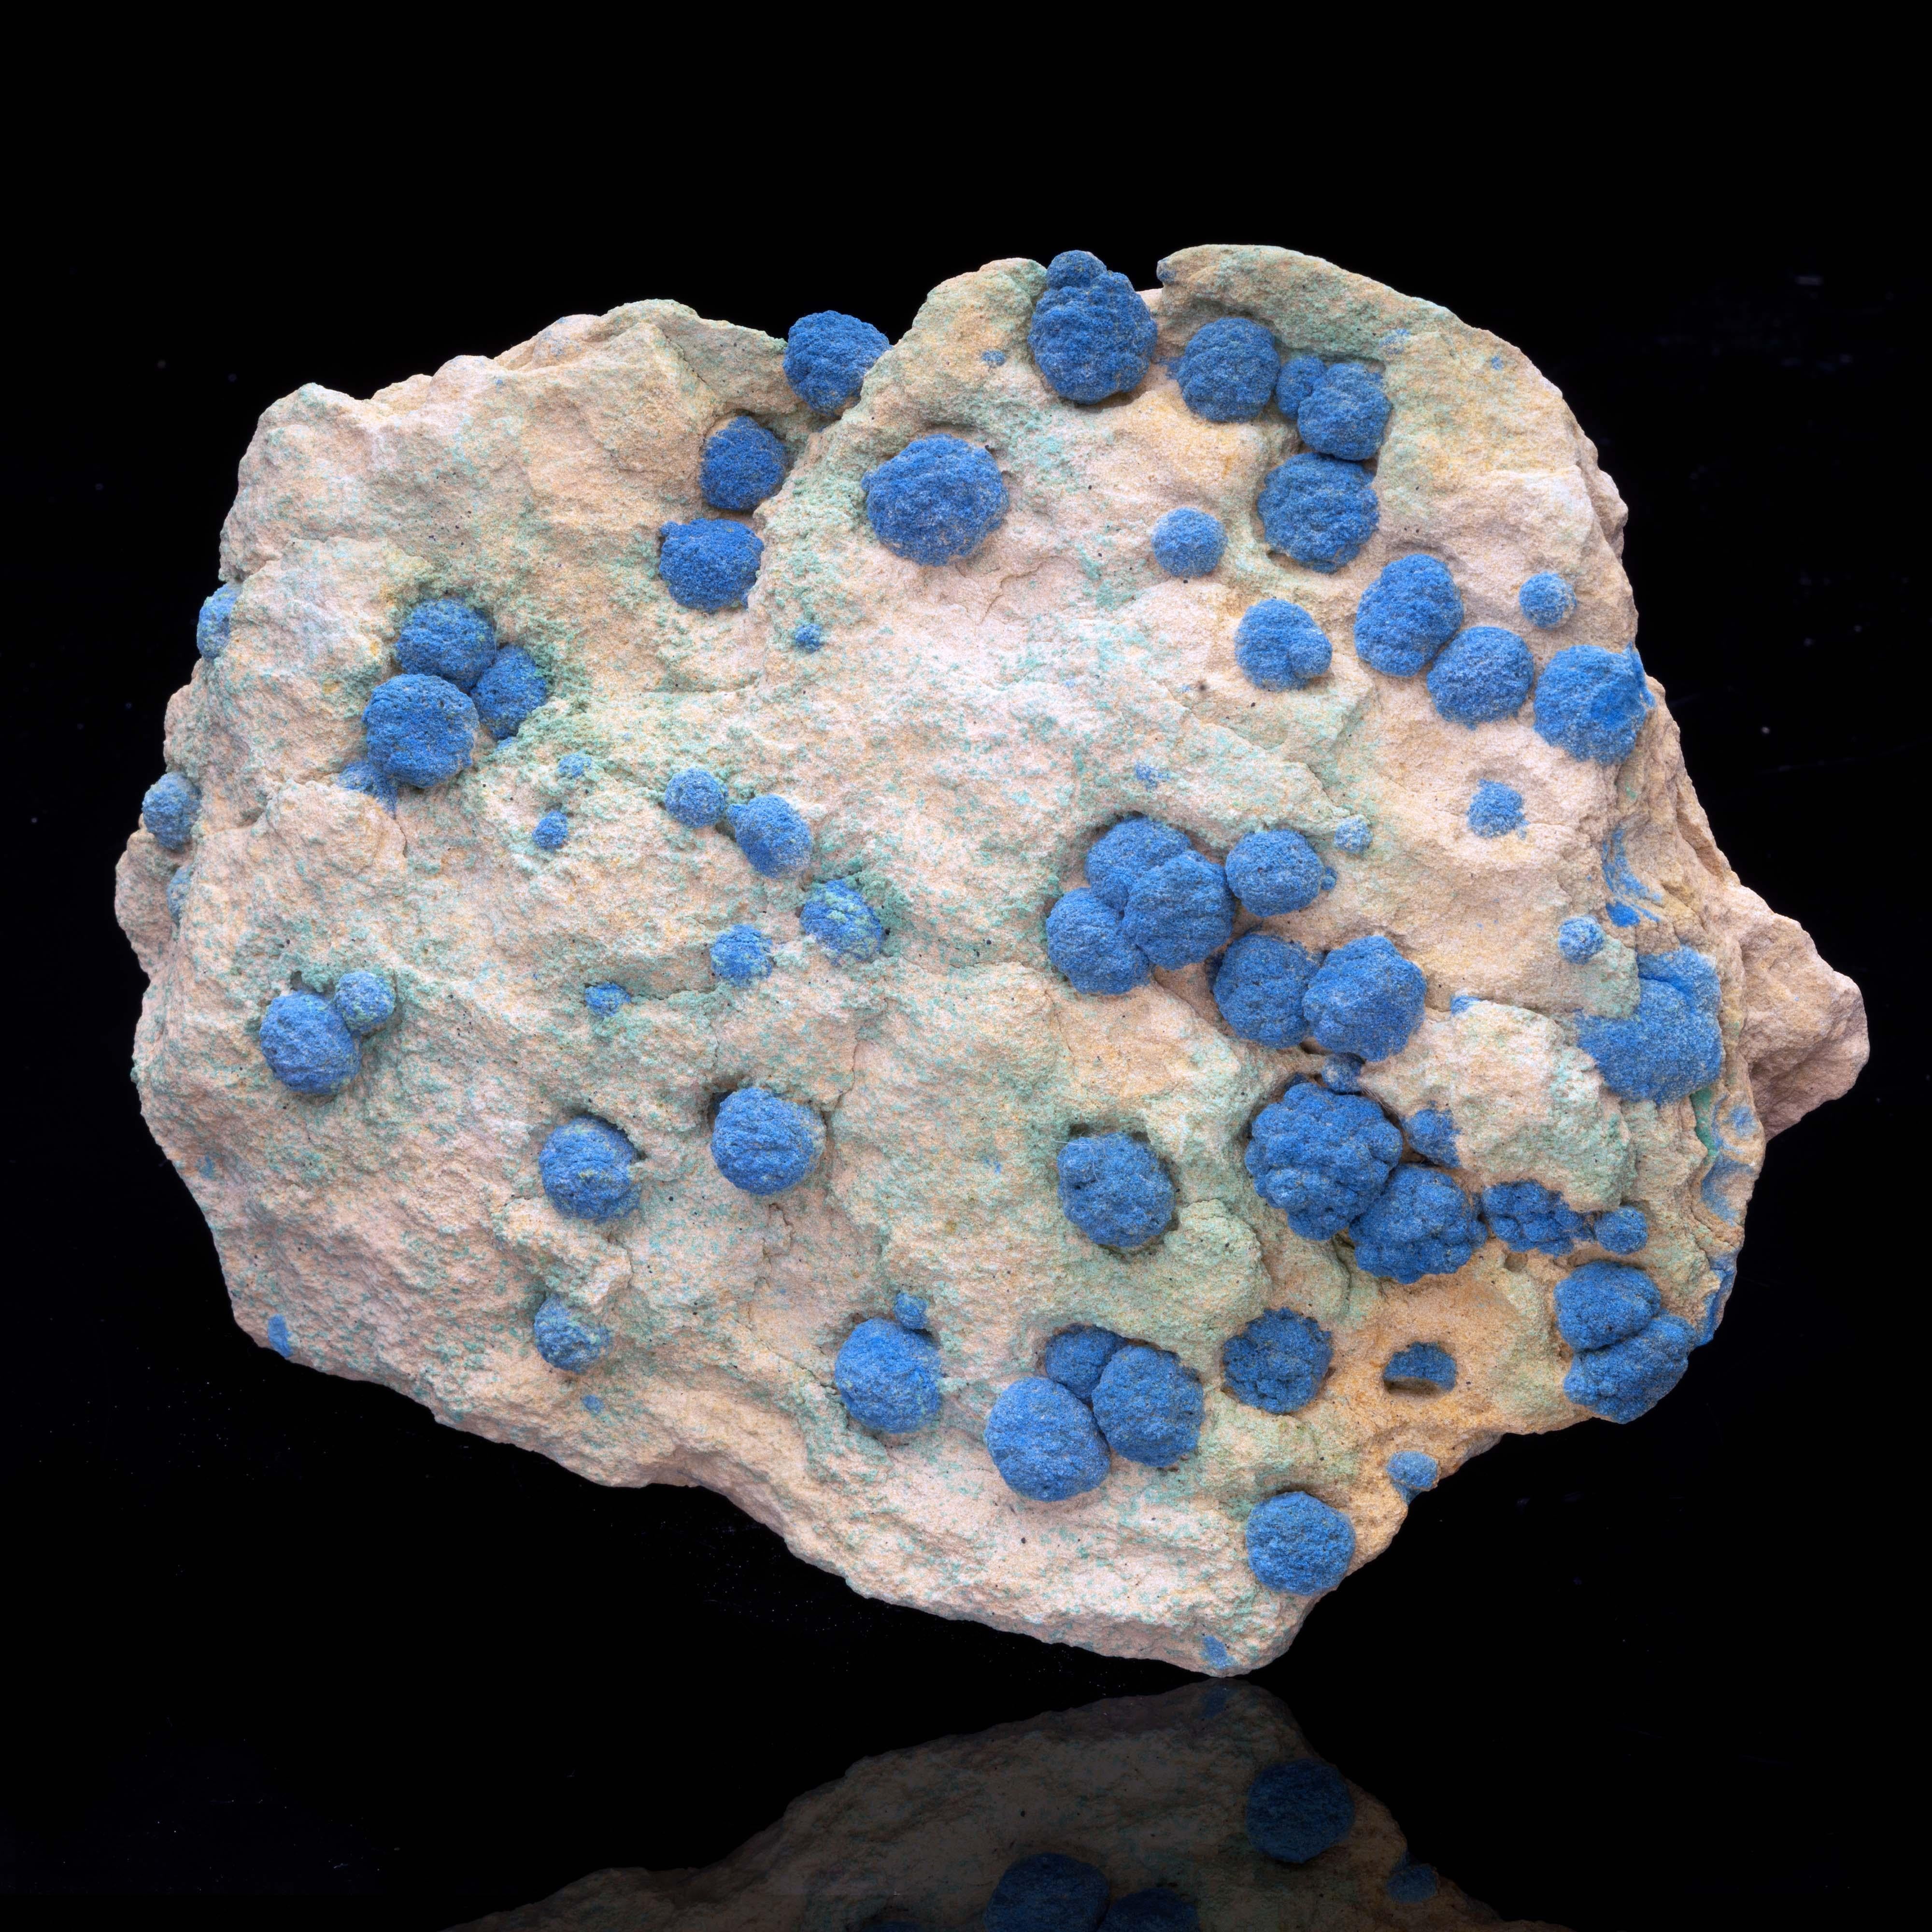 Enrich your collection with this mineralogical classic from the Big Indian Mine in San Juan County, Utah. The brilliantly pigmented blue azurite concretions or 